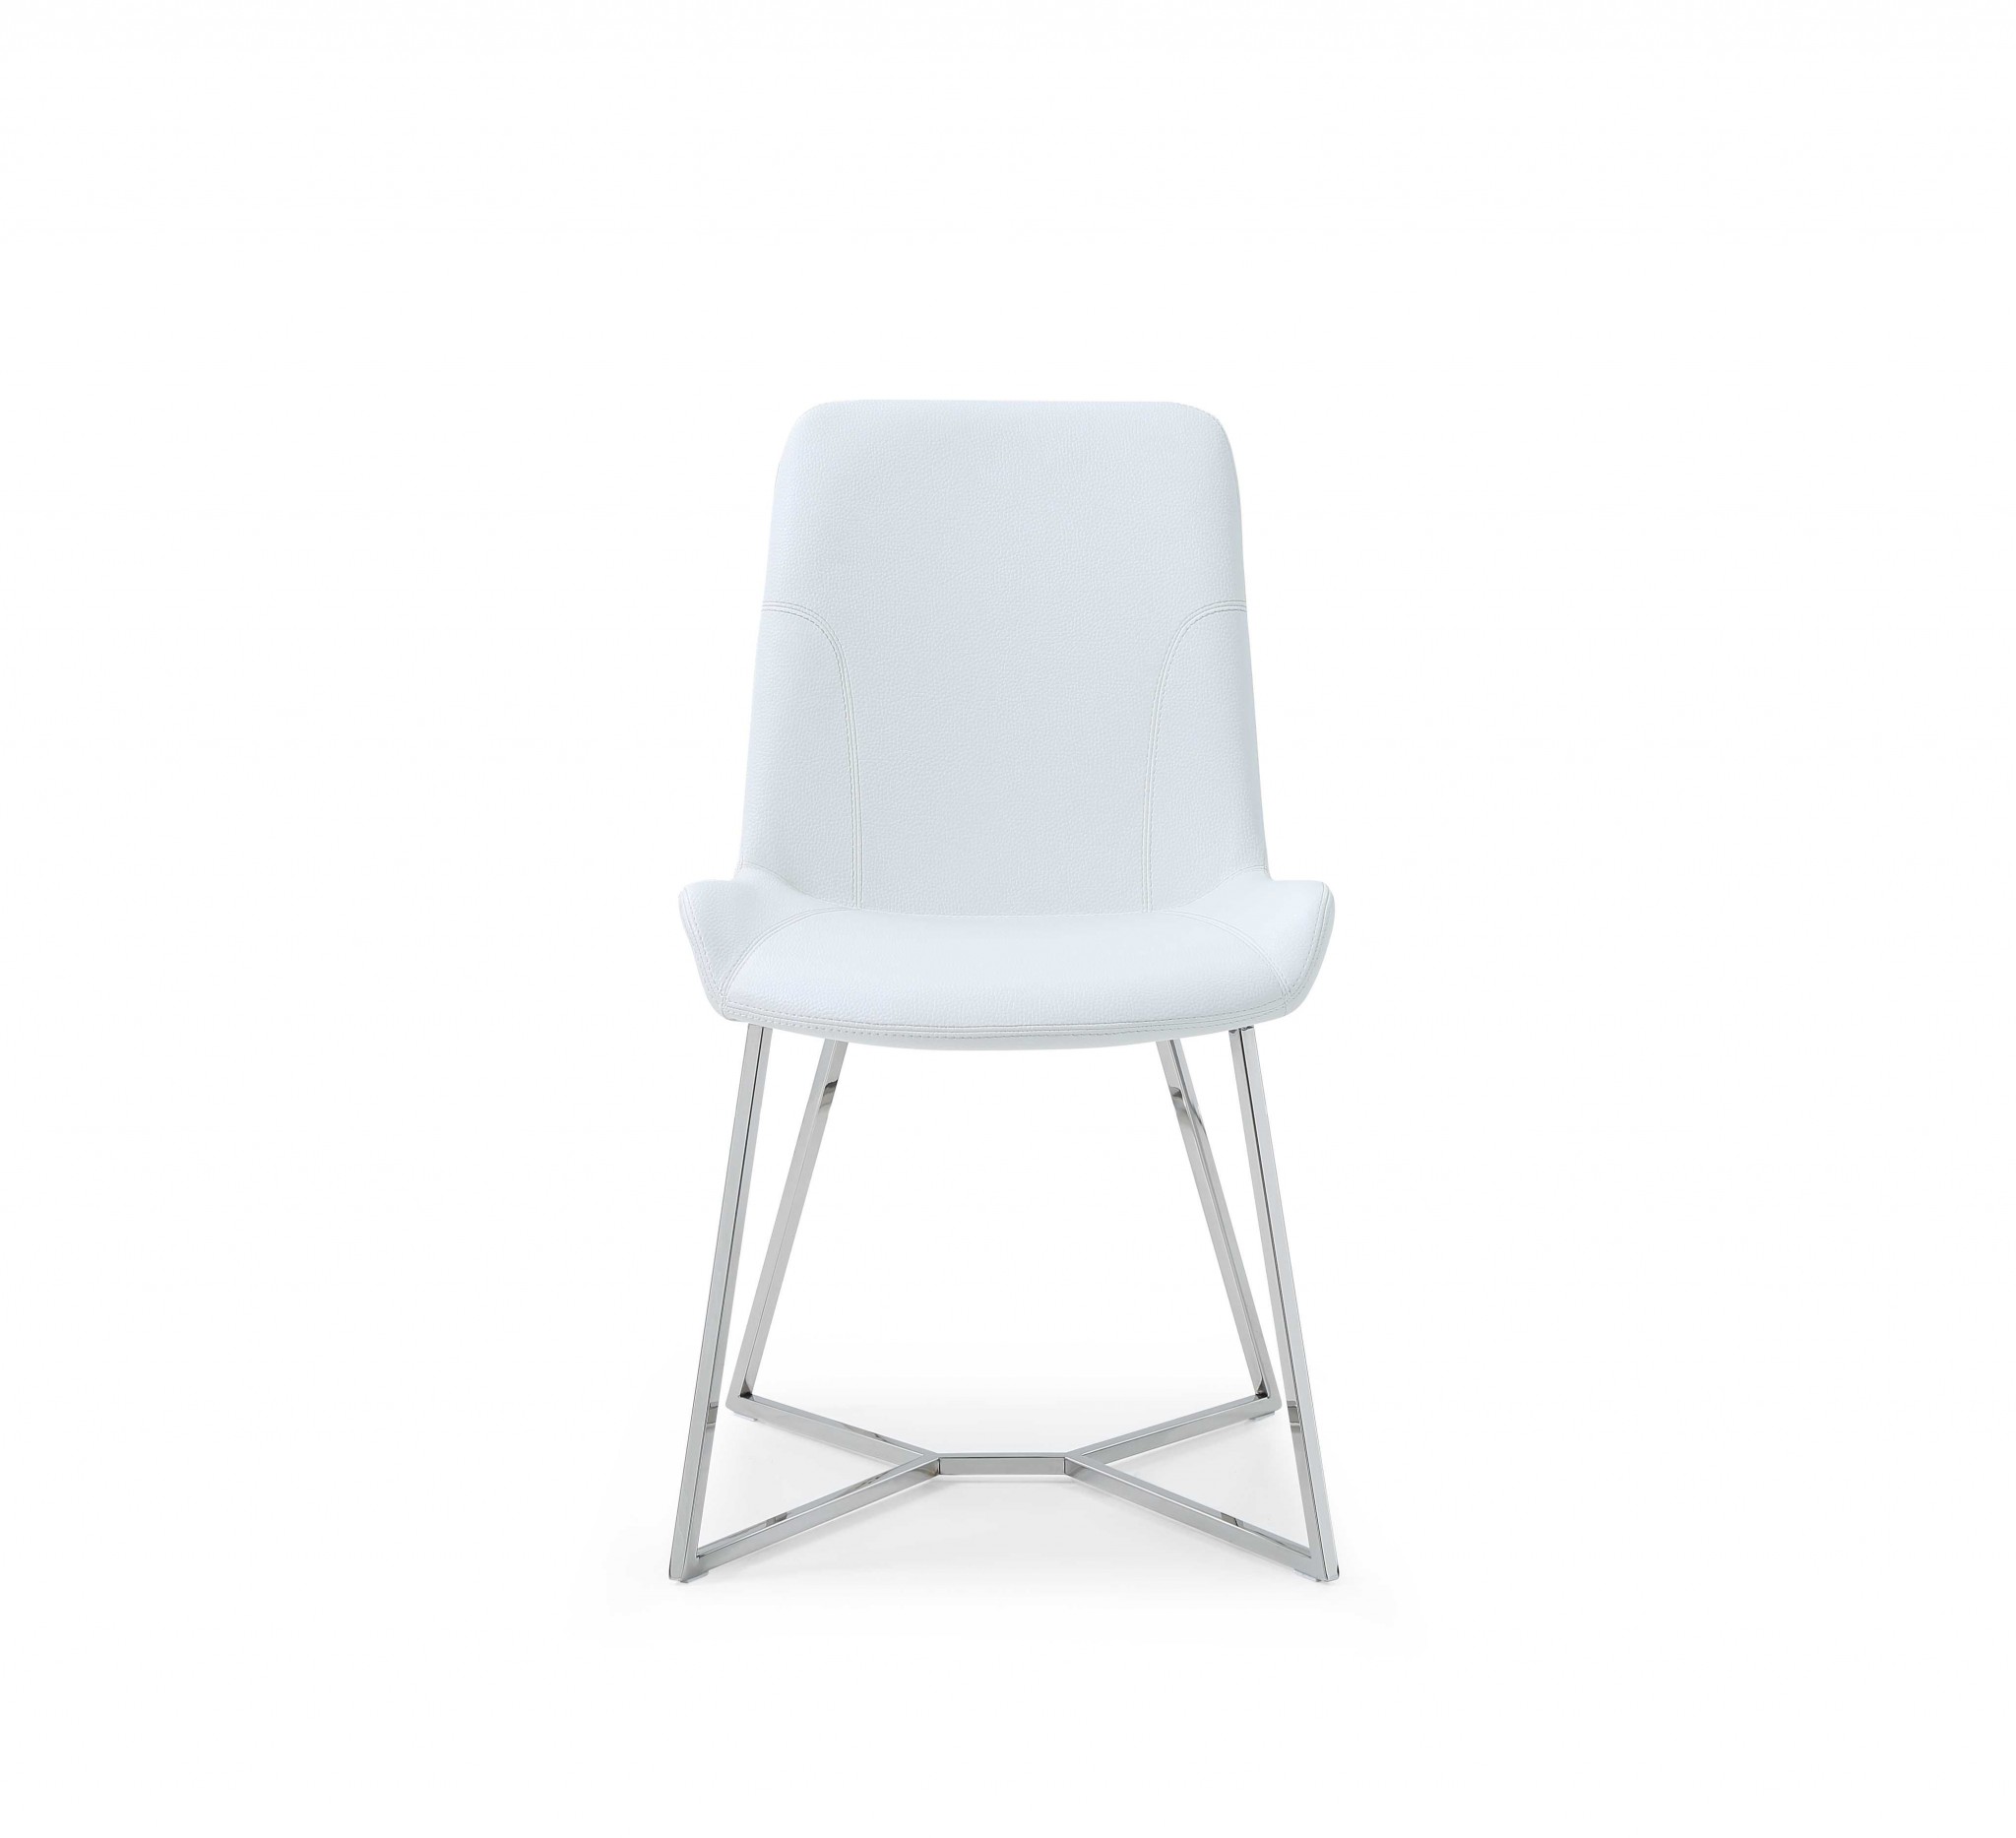 24" X 20" X 34" White Faux Leather or Metal Dining Chair